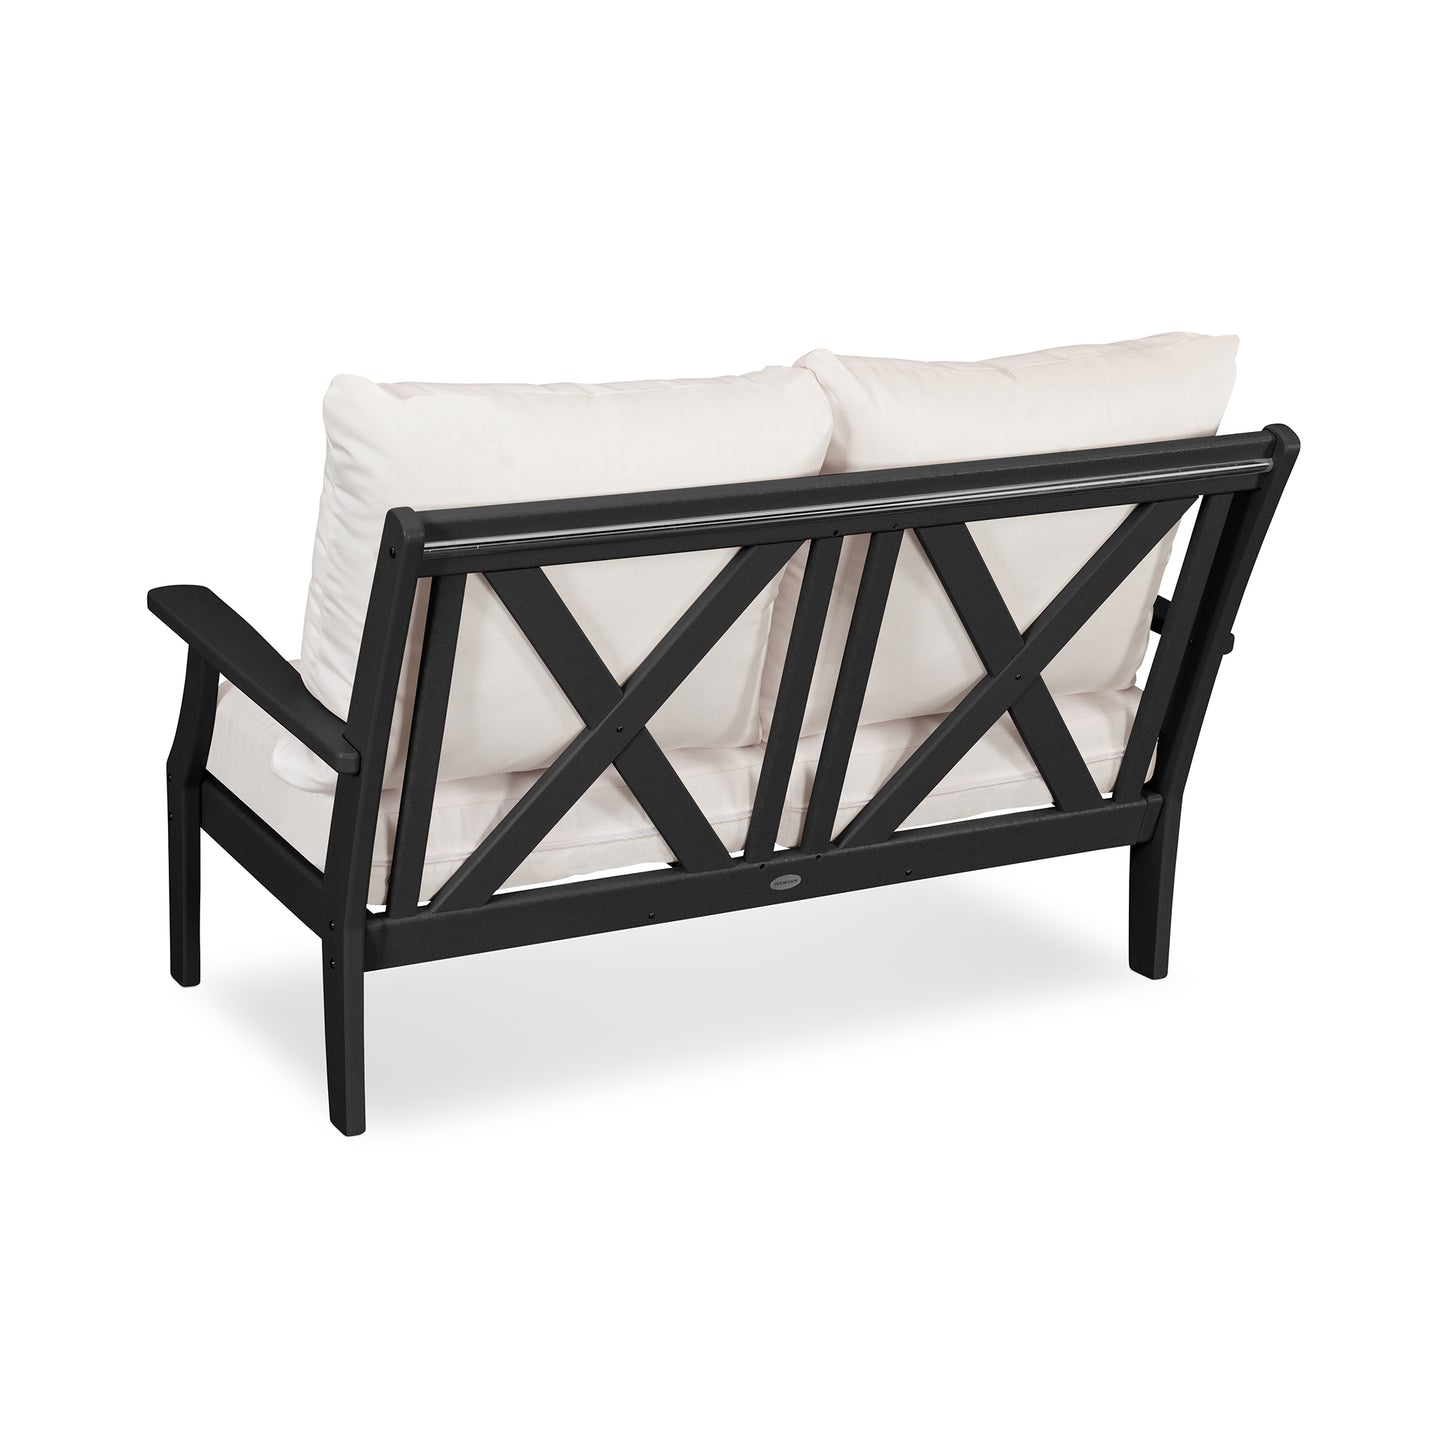 Sentence with replaced product: Black POLYWOOD® Braxton Deep Seating Settee frame with a criss-cross design on the sides, paired with white cushions, isolated on a white background.